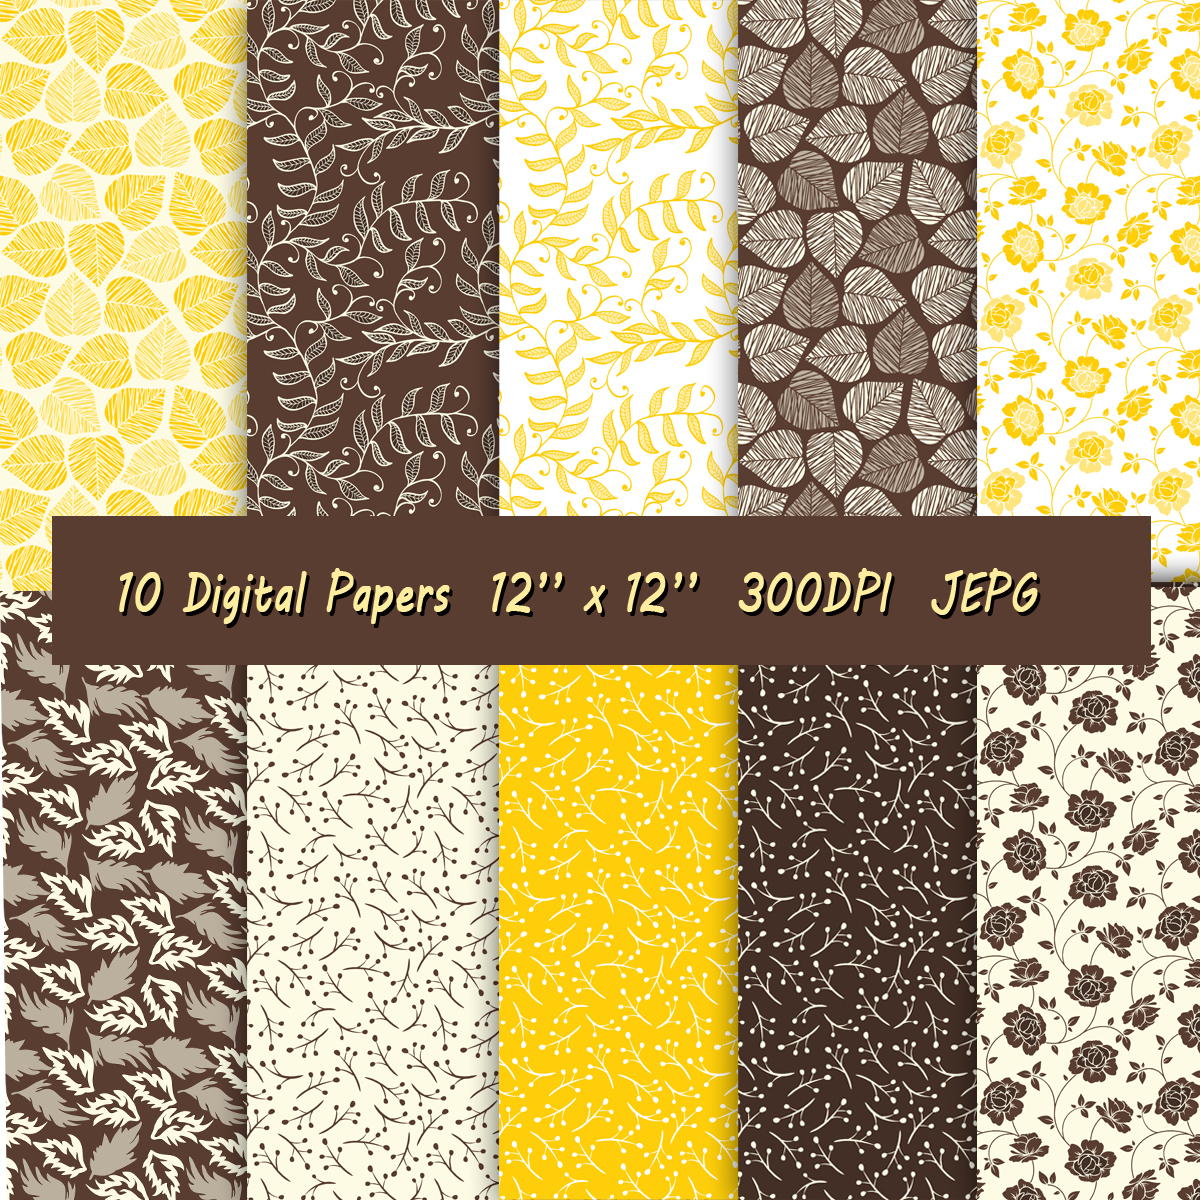 Digital Paper In A Beautiful Scrapbook Set With Yellow And Brown Patterns Featuring Flowers And Leaves